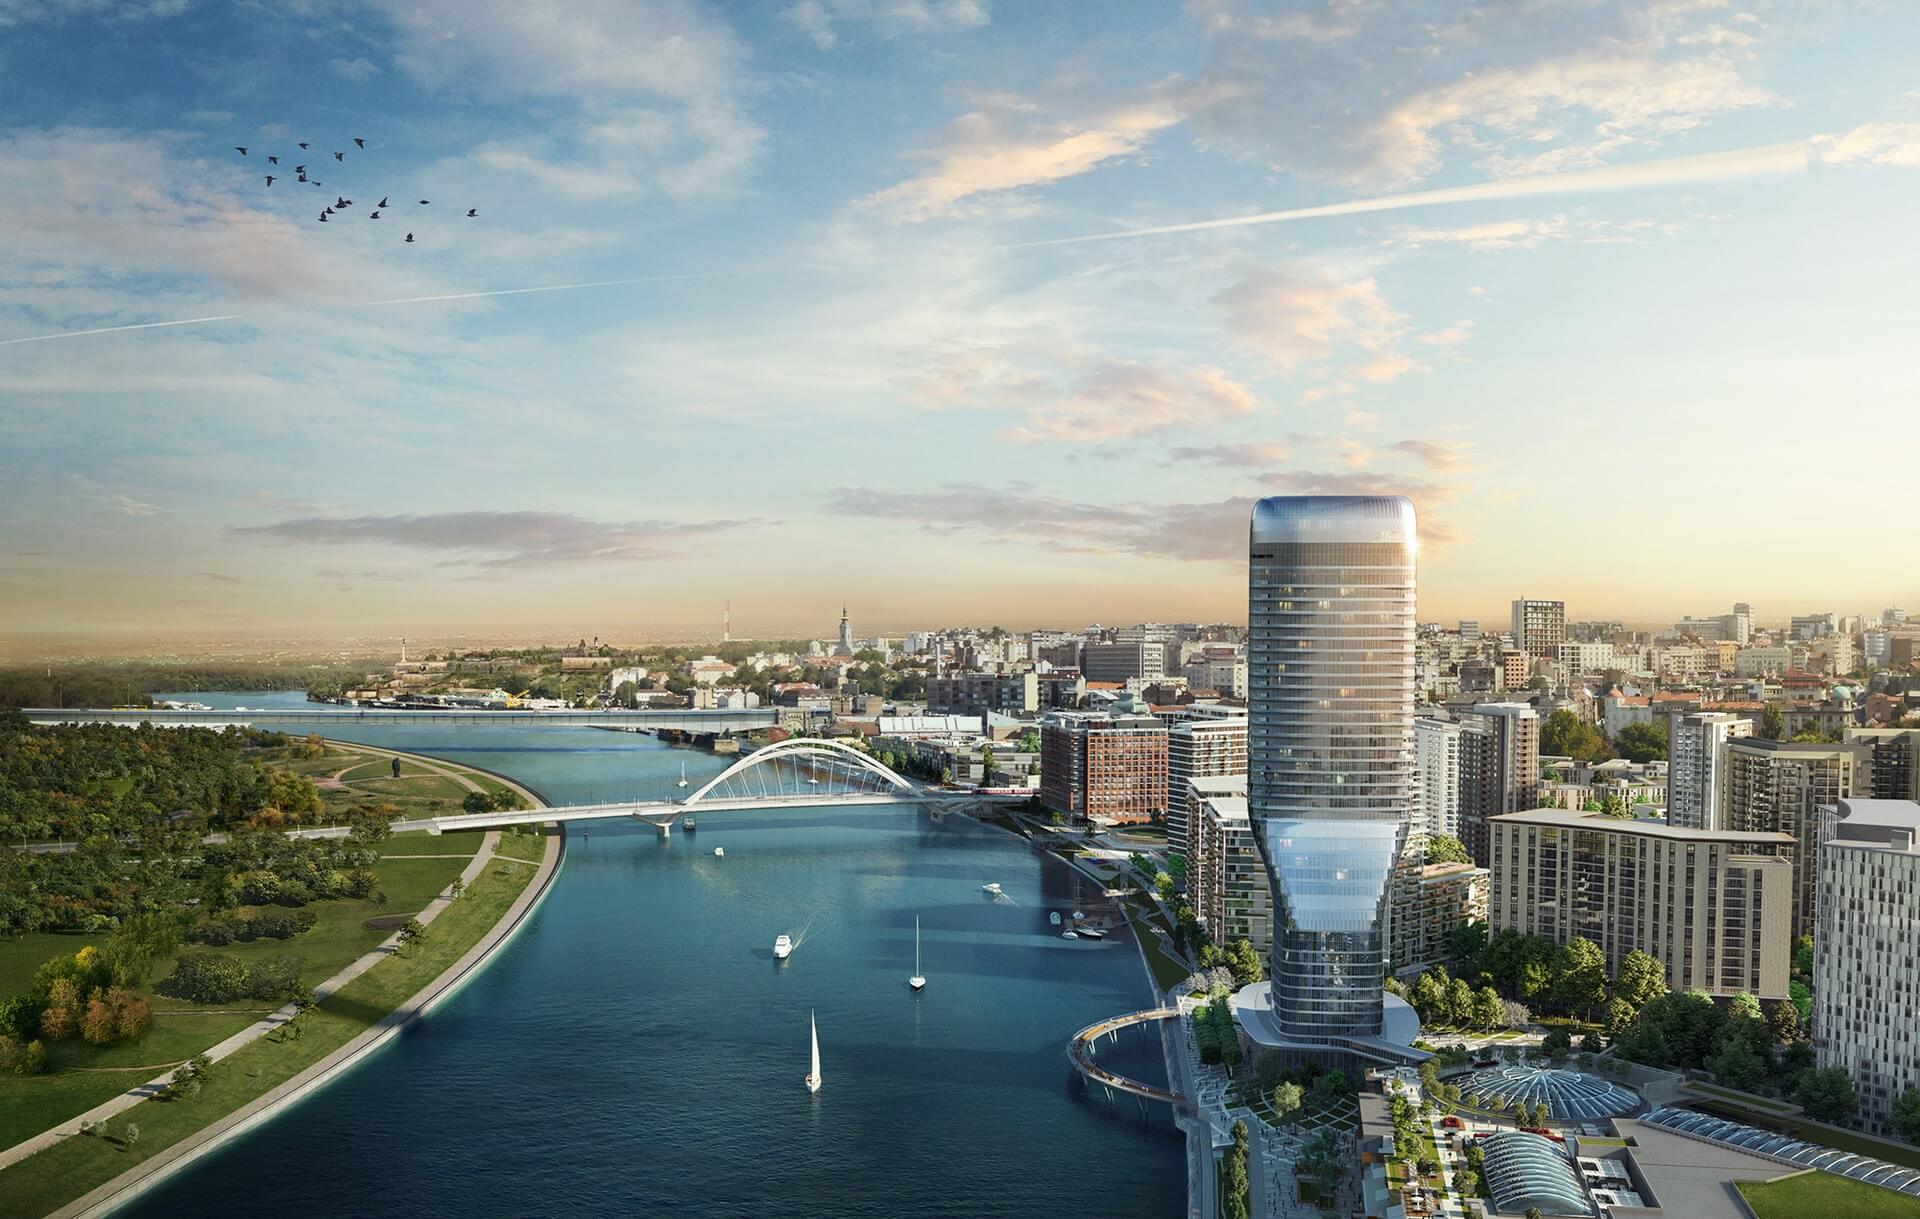 SIGNIFICANCE OF BELGRADE WATERFRONT LOCATION